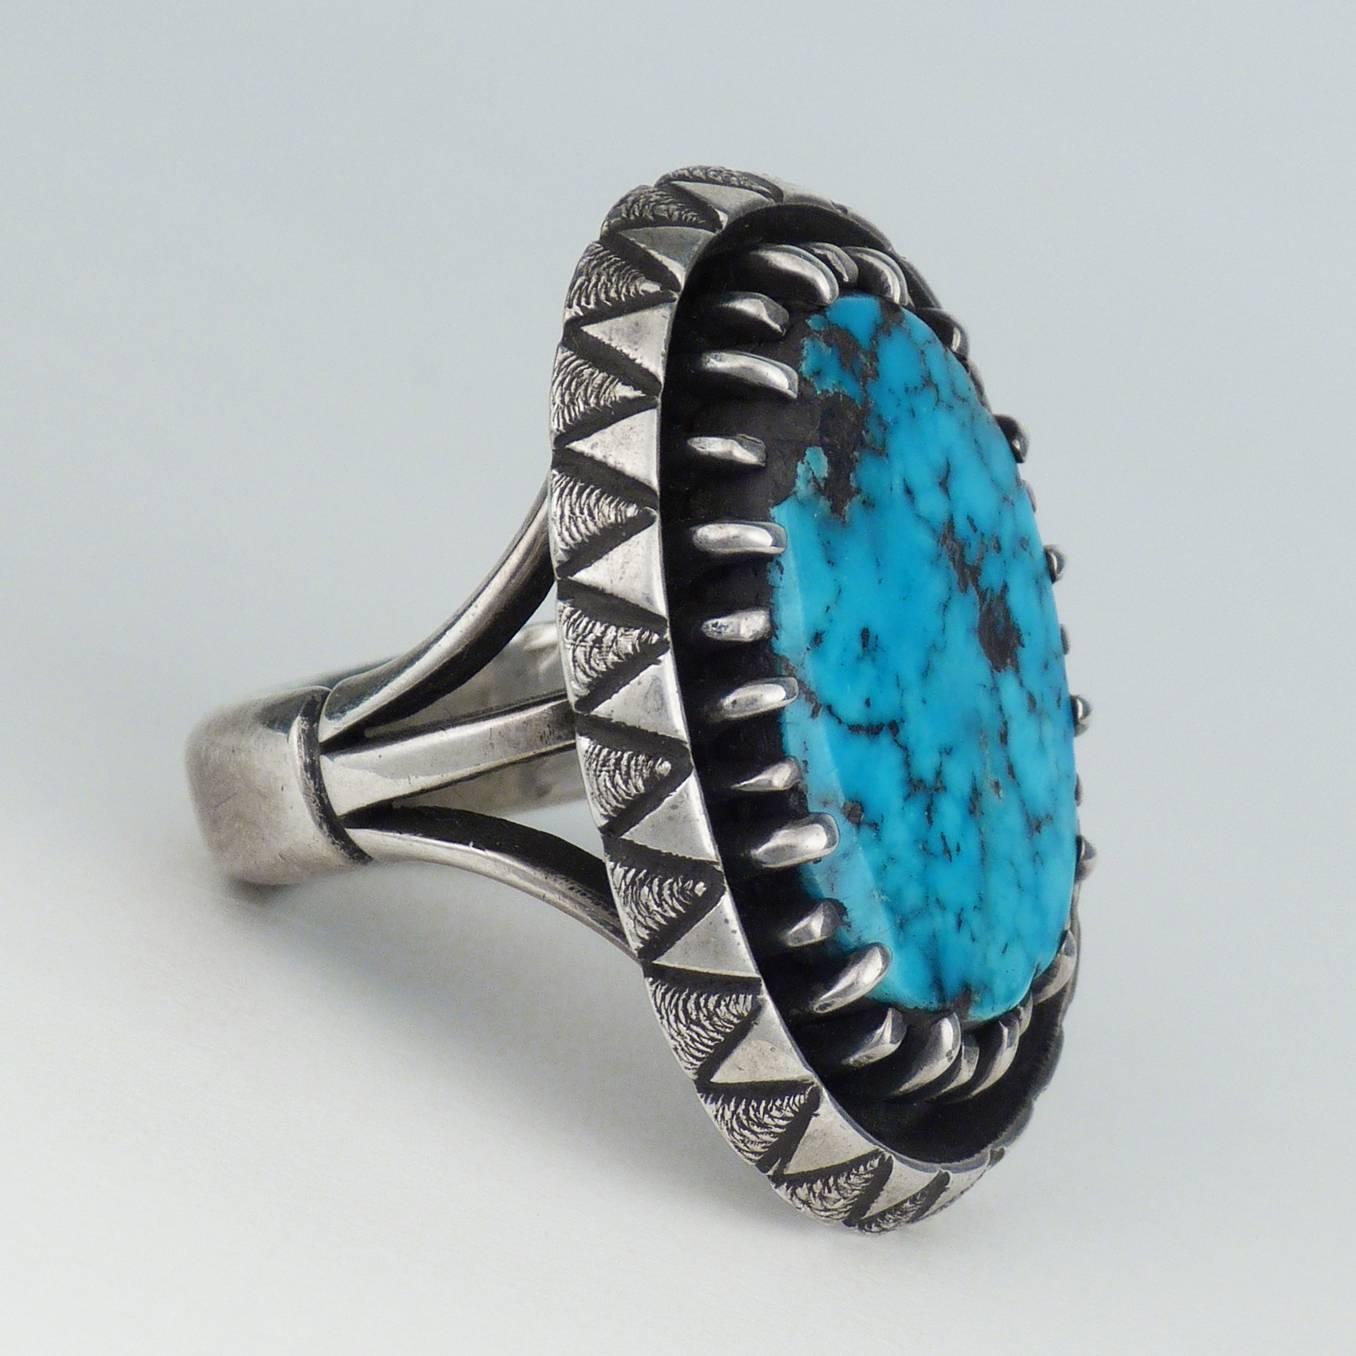 A beautiful turquoise ring by the master of Navajo modernism Kenneth Begay (1913-1977). Handmade 